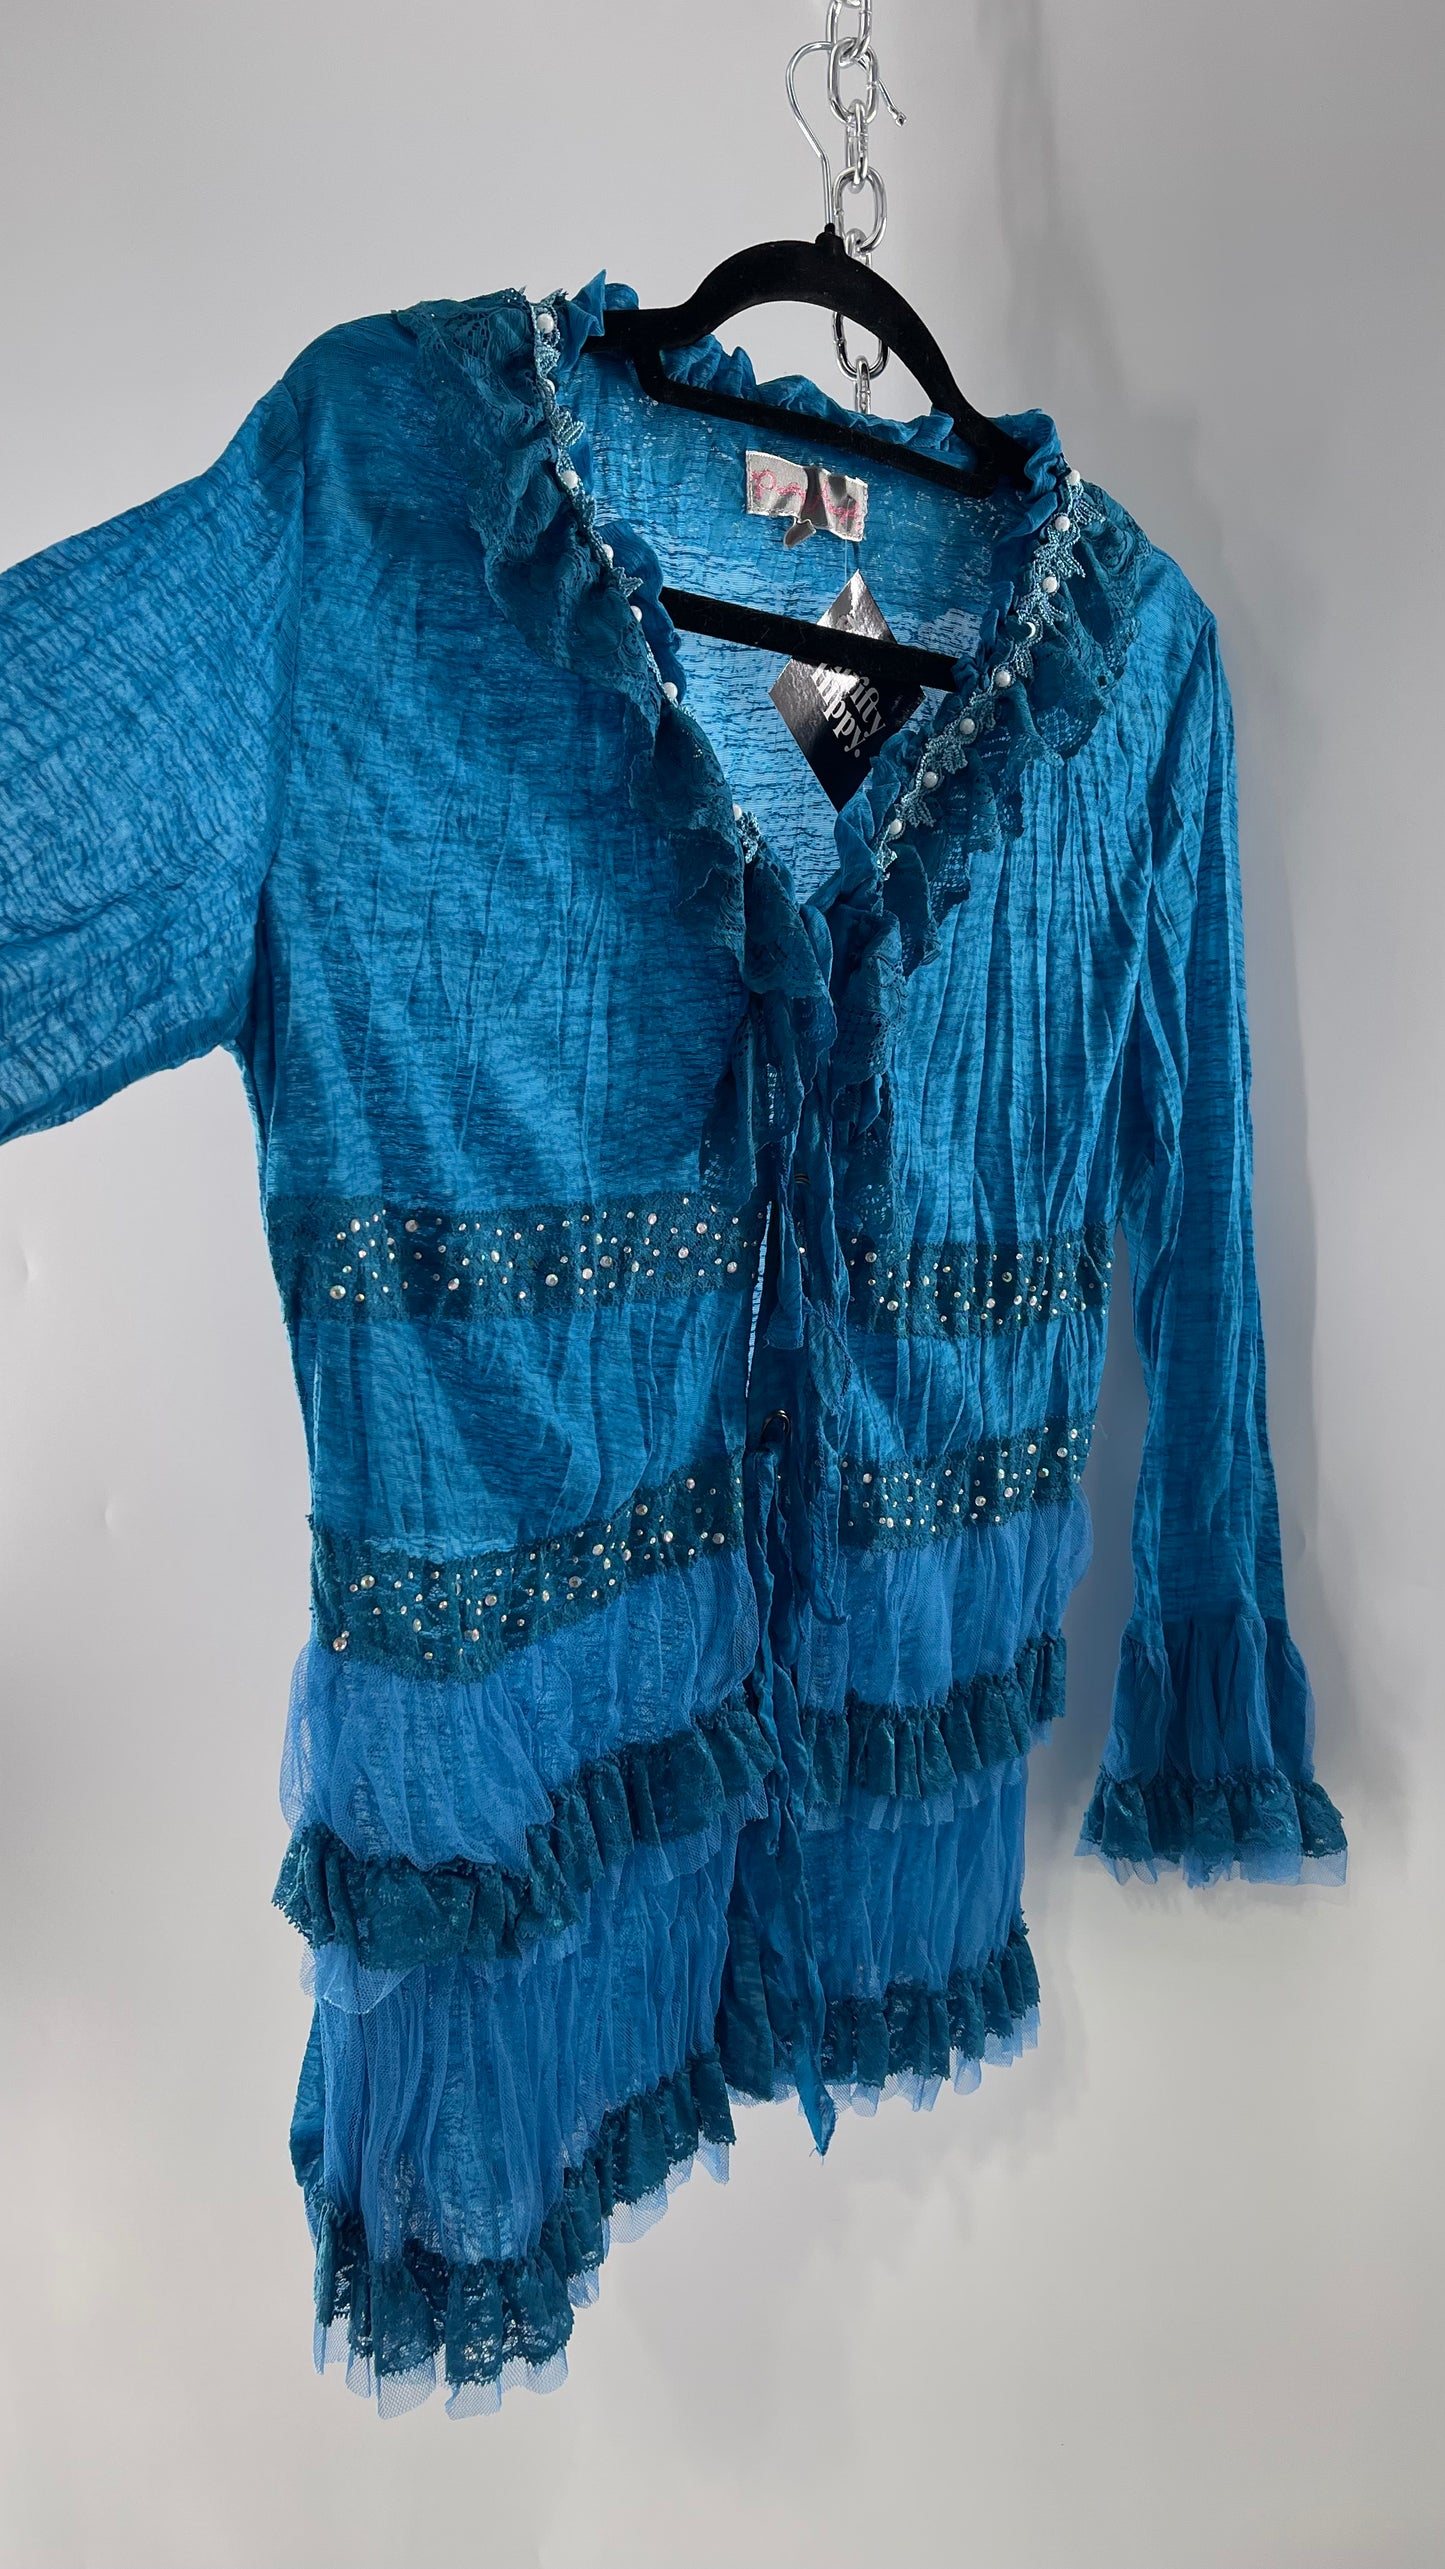 Vintage Pretty Angel Blue Long Sleeve Grommet Tie Bedazzled Blouse with Lace Ruffles and Pearlescent Beading (Large)